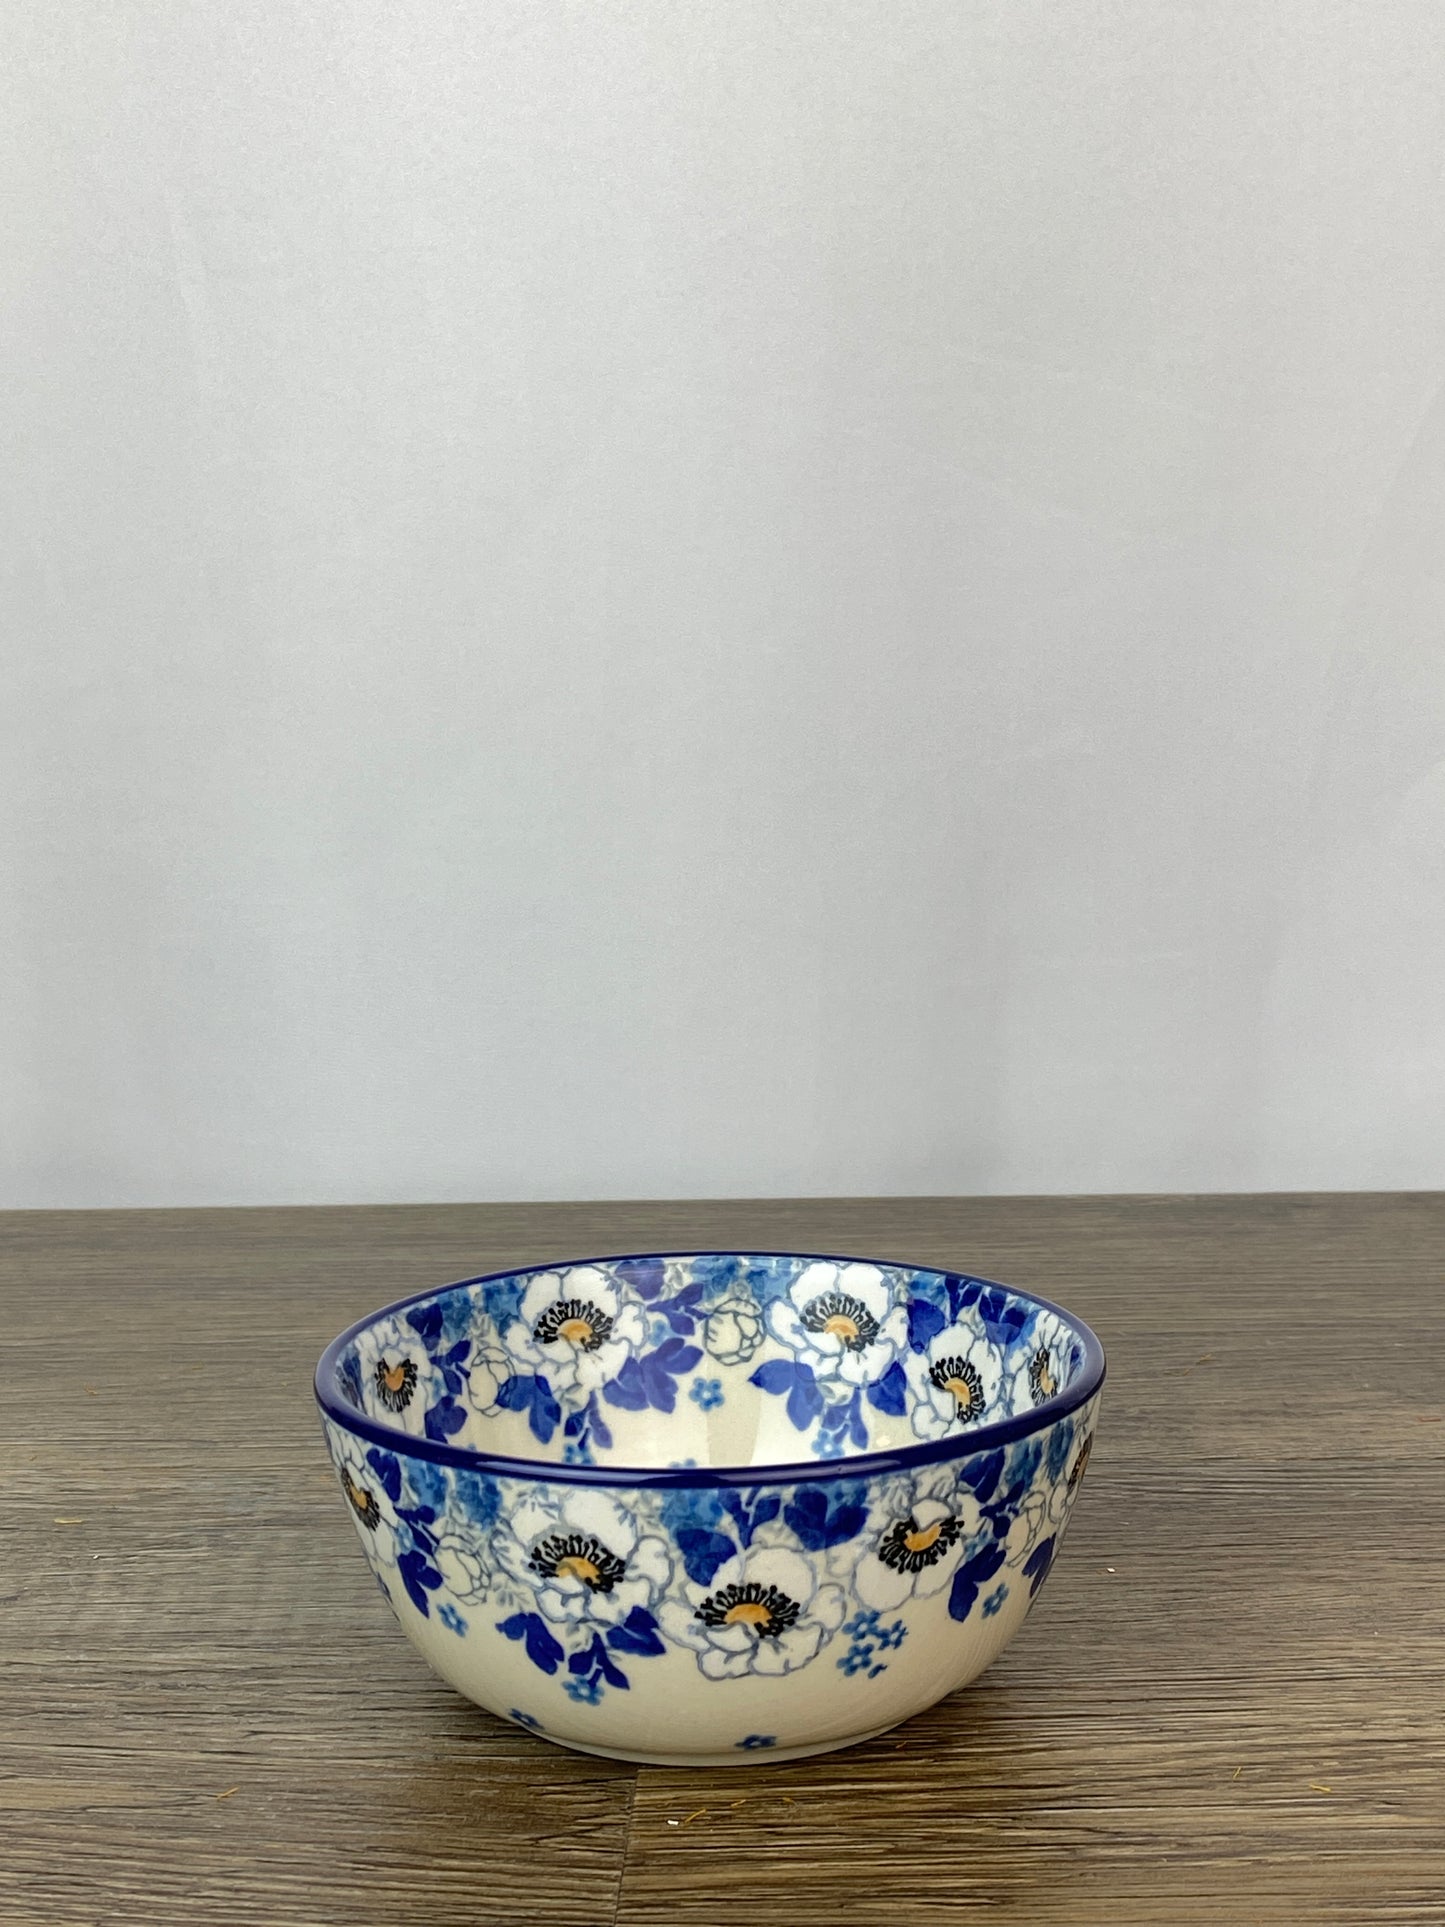 Small Cereal / Dessert Bowl - Shape 17 - Pattern 2222